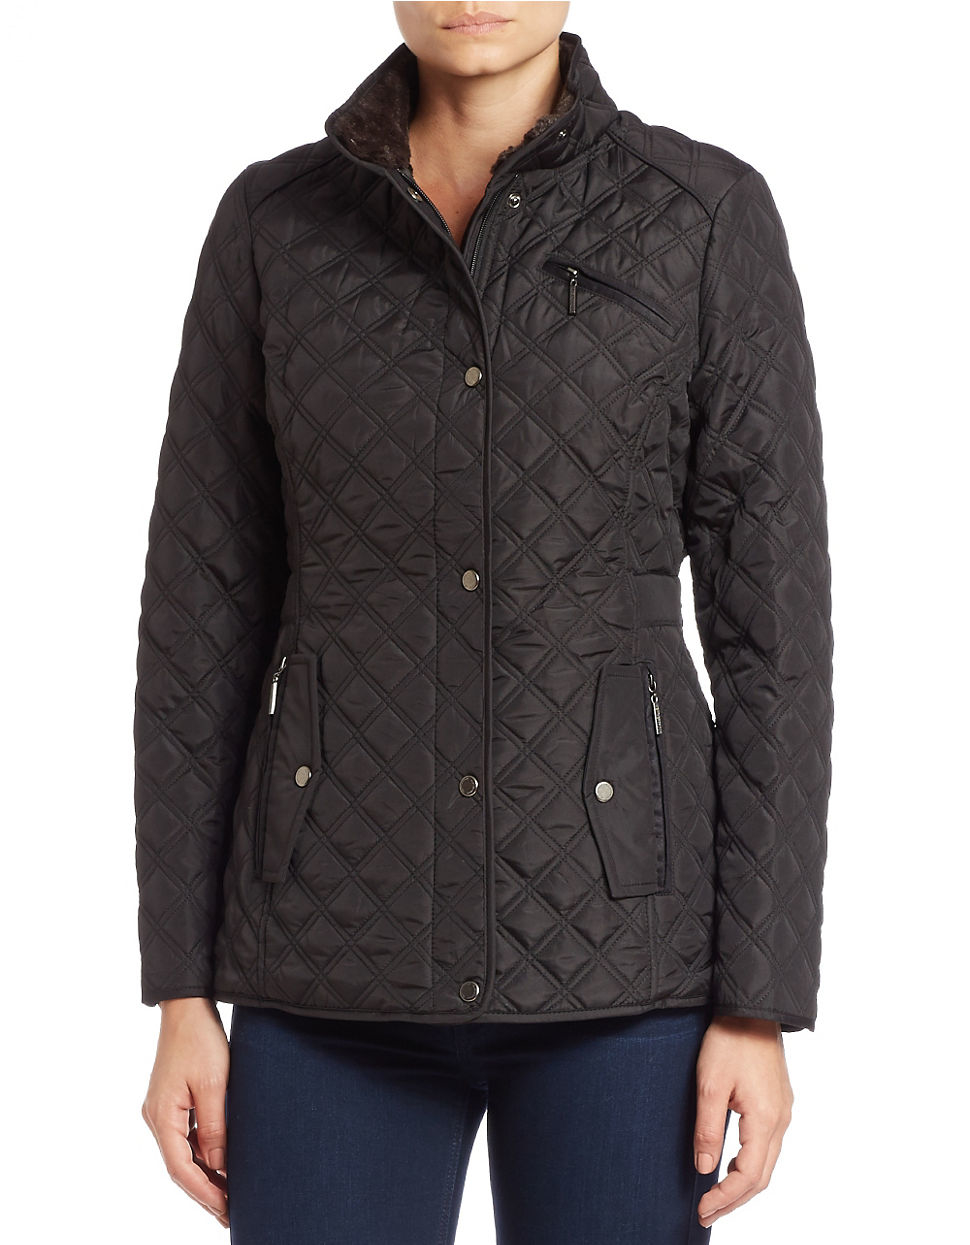 Lyst - Weatherproof Quilted Faux Fur-lined Coat in Black